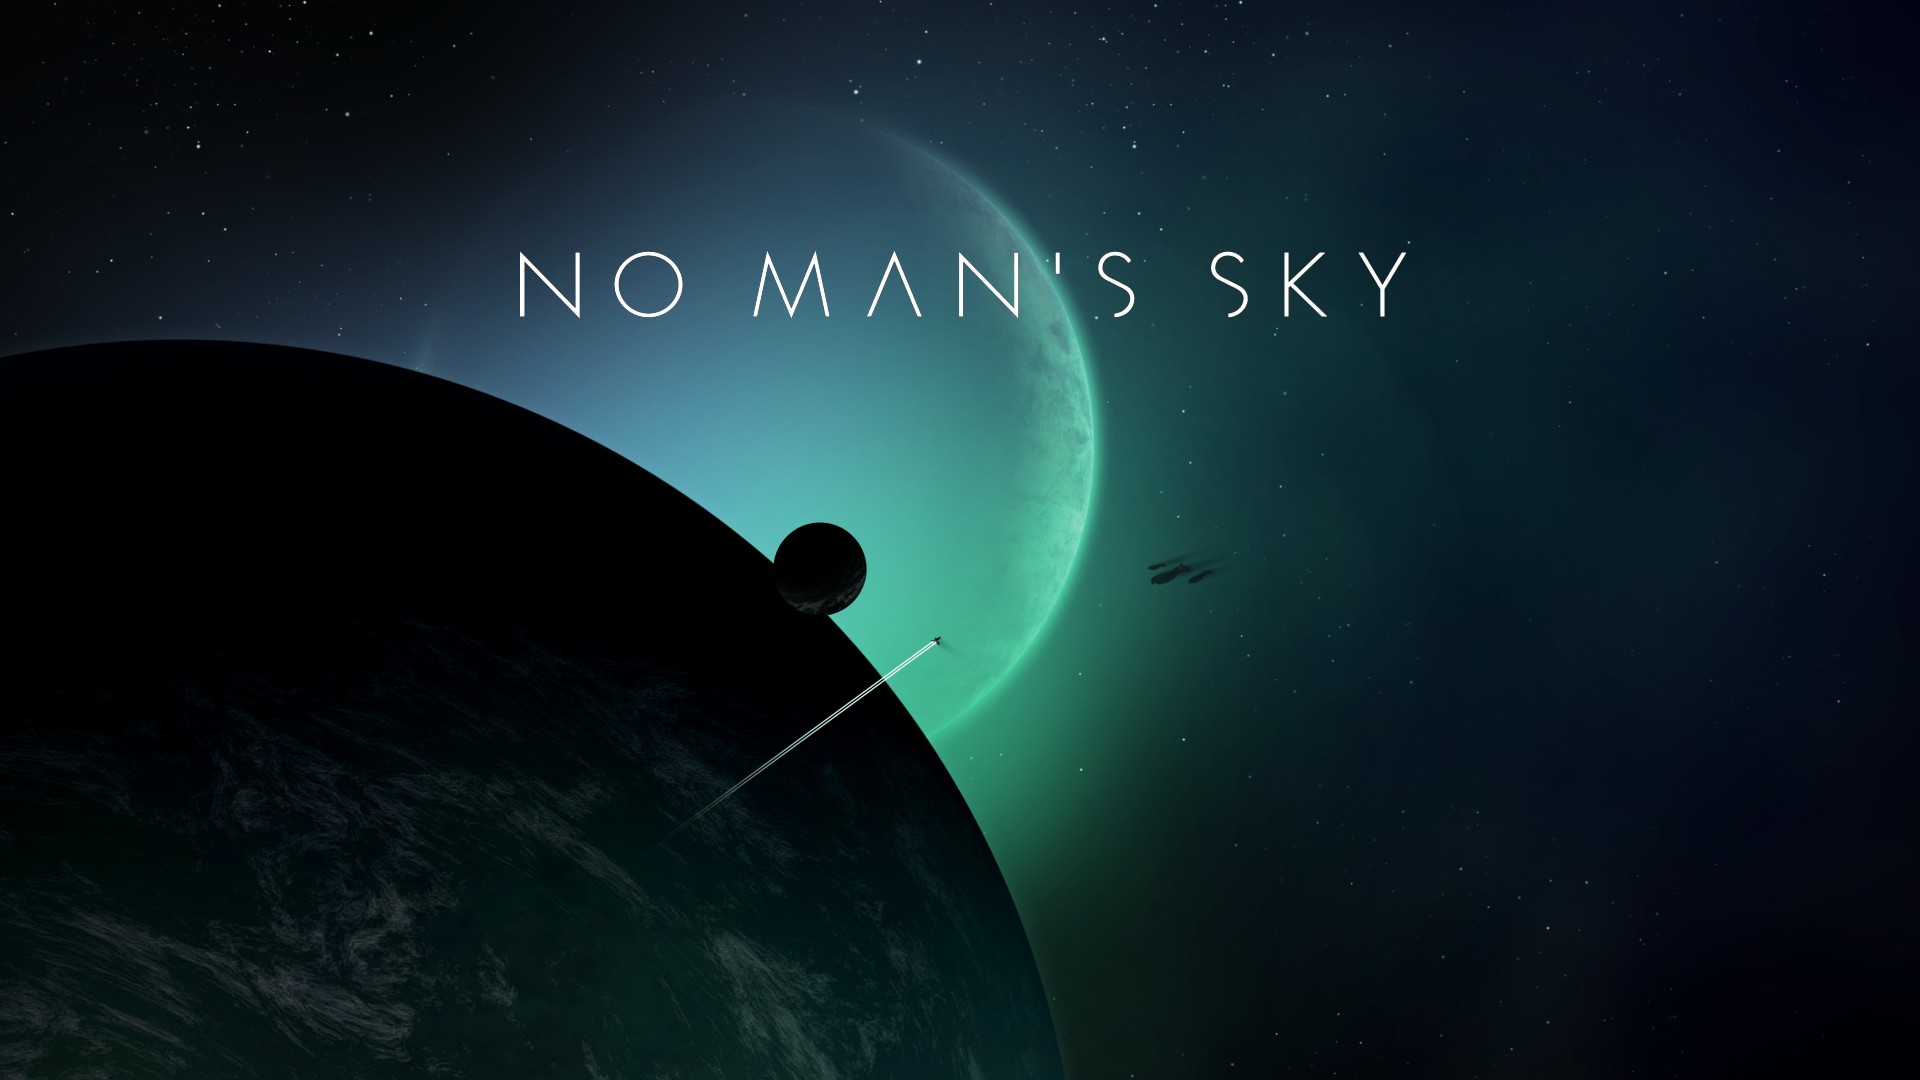 video games, No Mans Sky, Science fiction, Spaceship, Planet Wallpaper